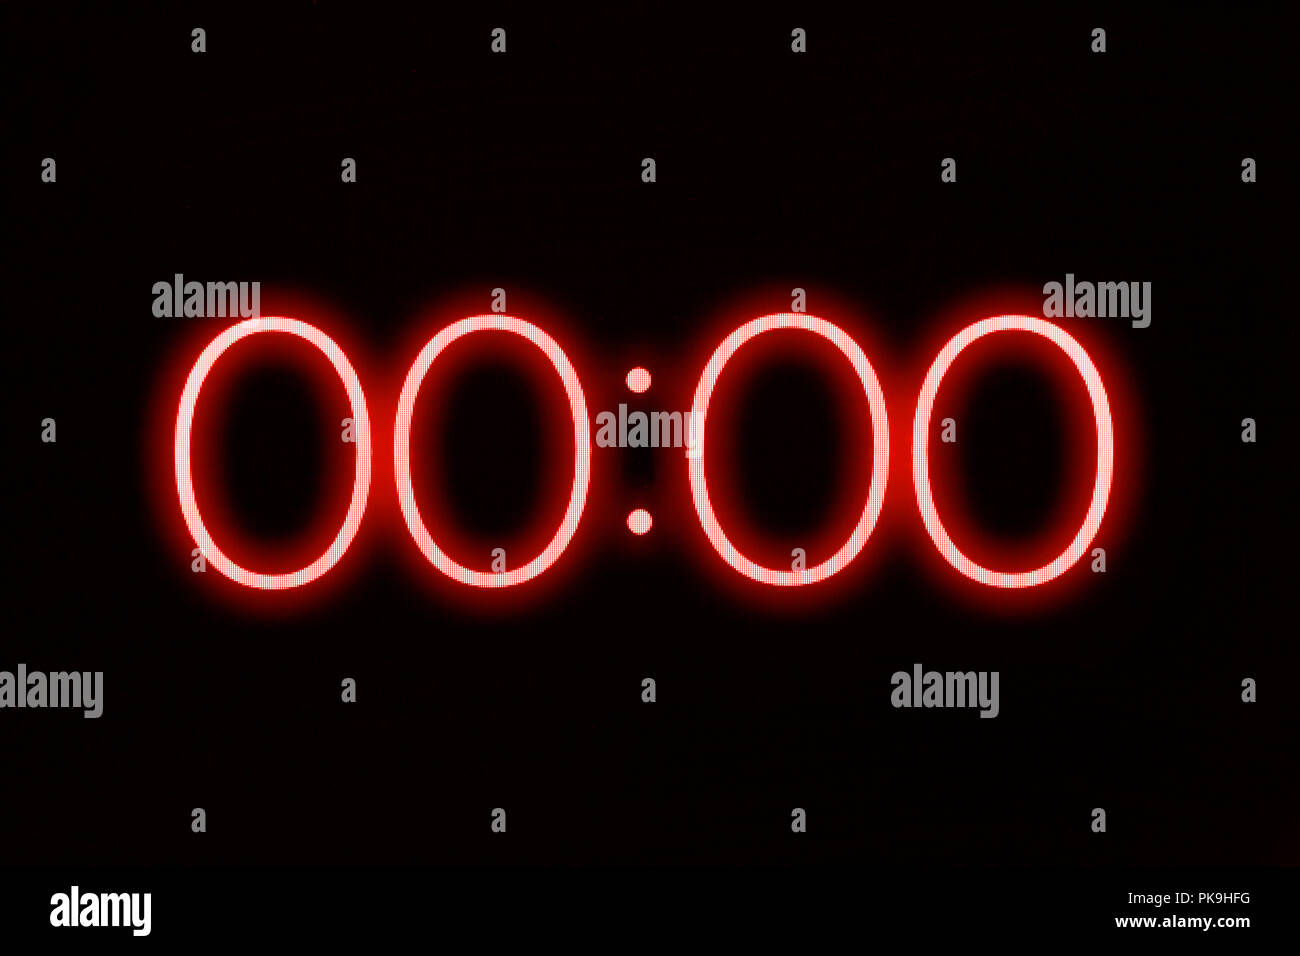 Digital clock timer stopwatch display showing 0 zero seconds remaining.  Emergency, urgency, out of time concept Stock Photo - Alamy